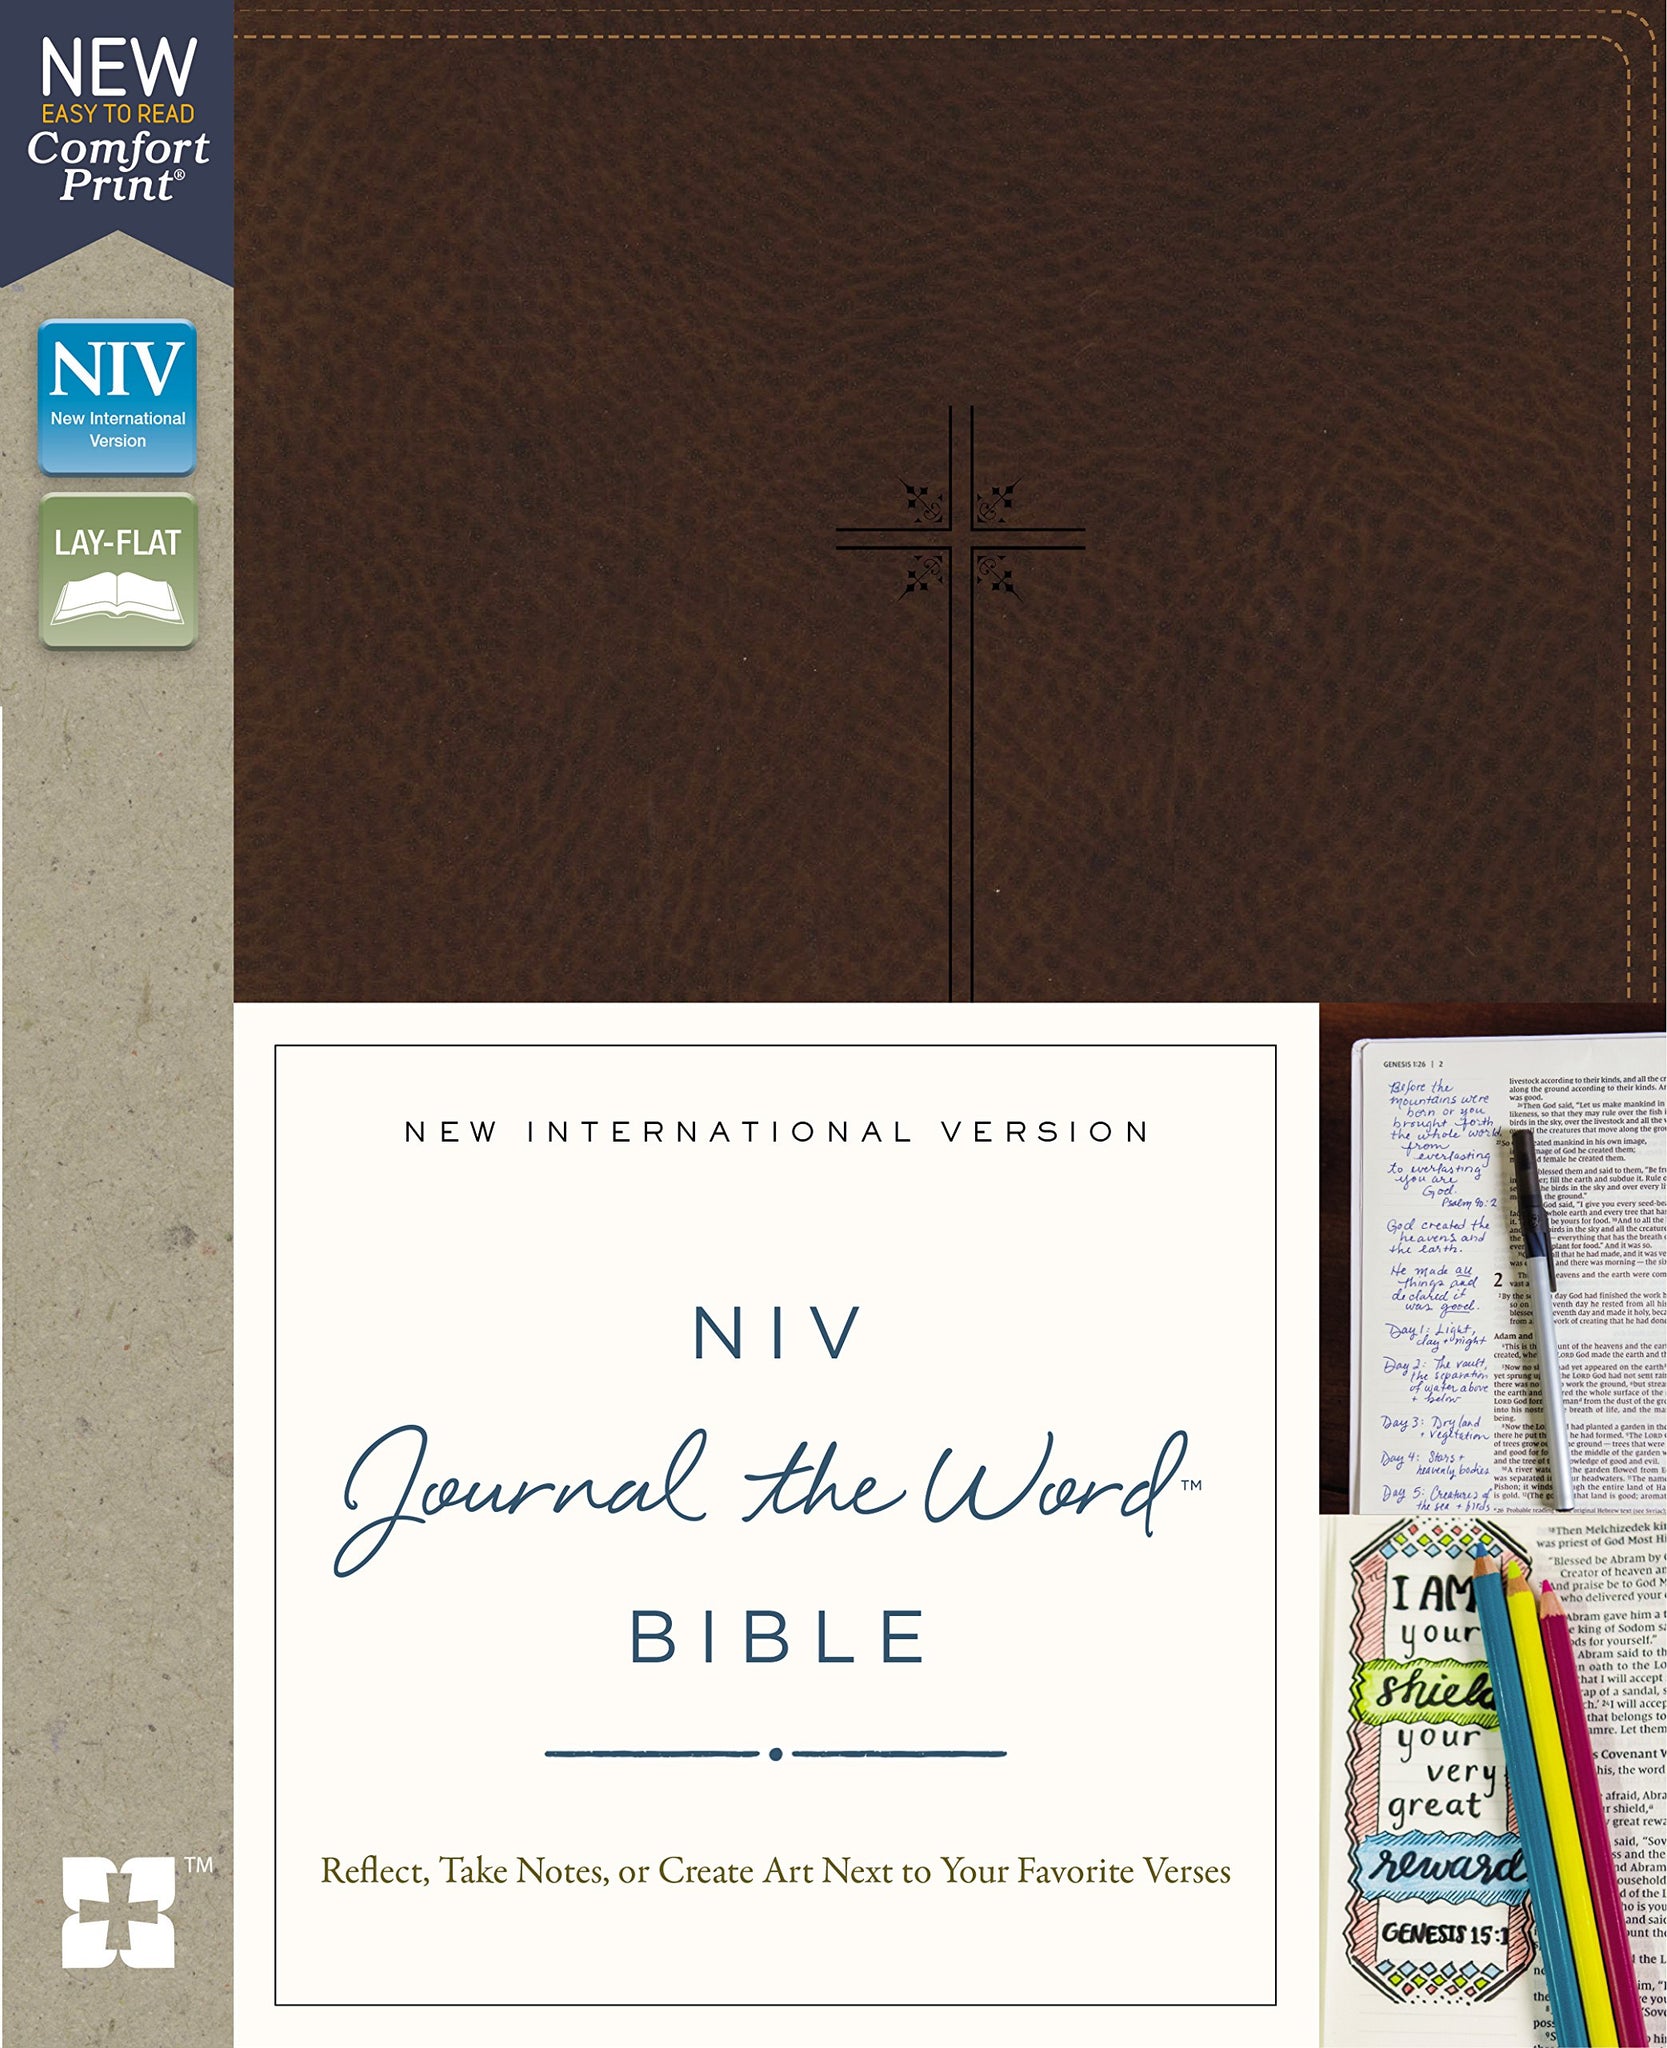 NIV, Journal the Word Bible for Teen Girls, Red Letter Edition: Includes Over 450 Journaling Prompts! [Gold/Floral] [Book]